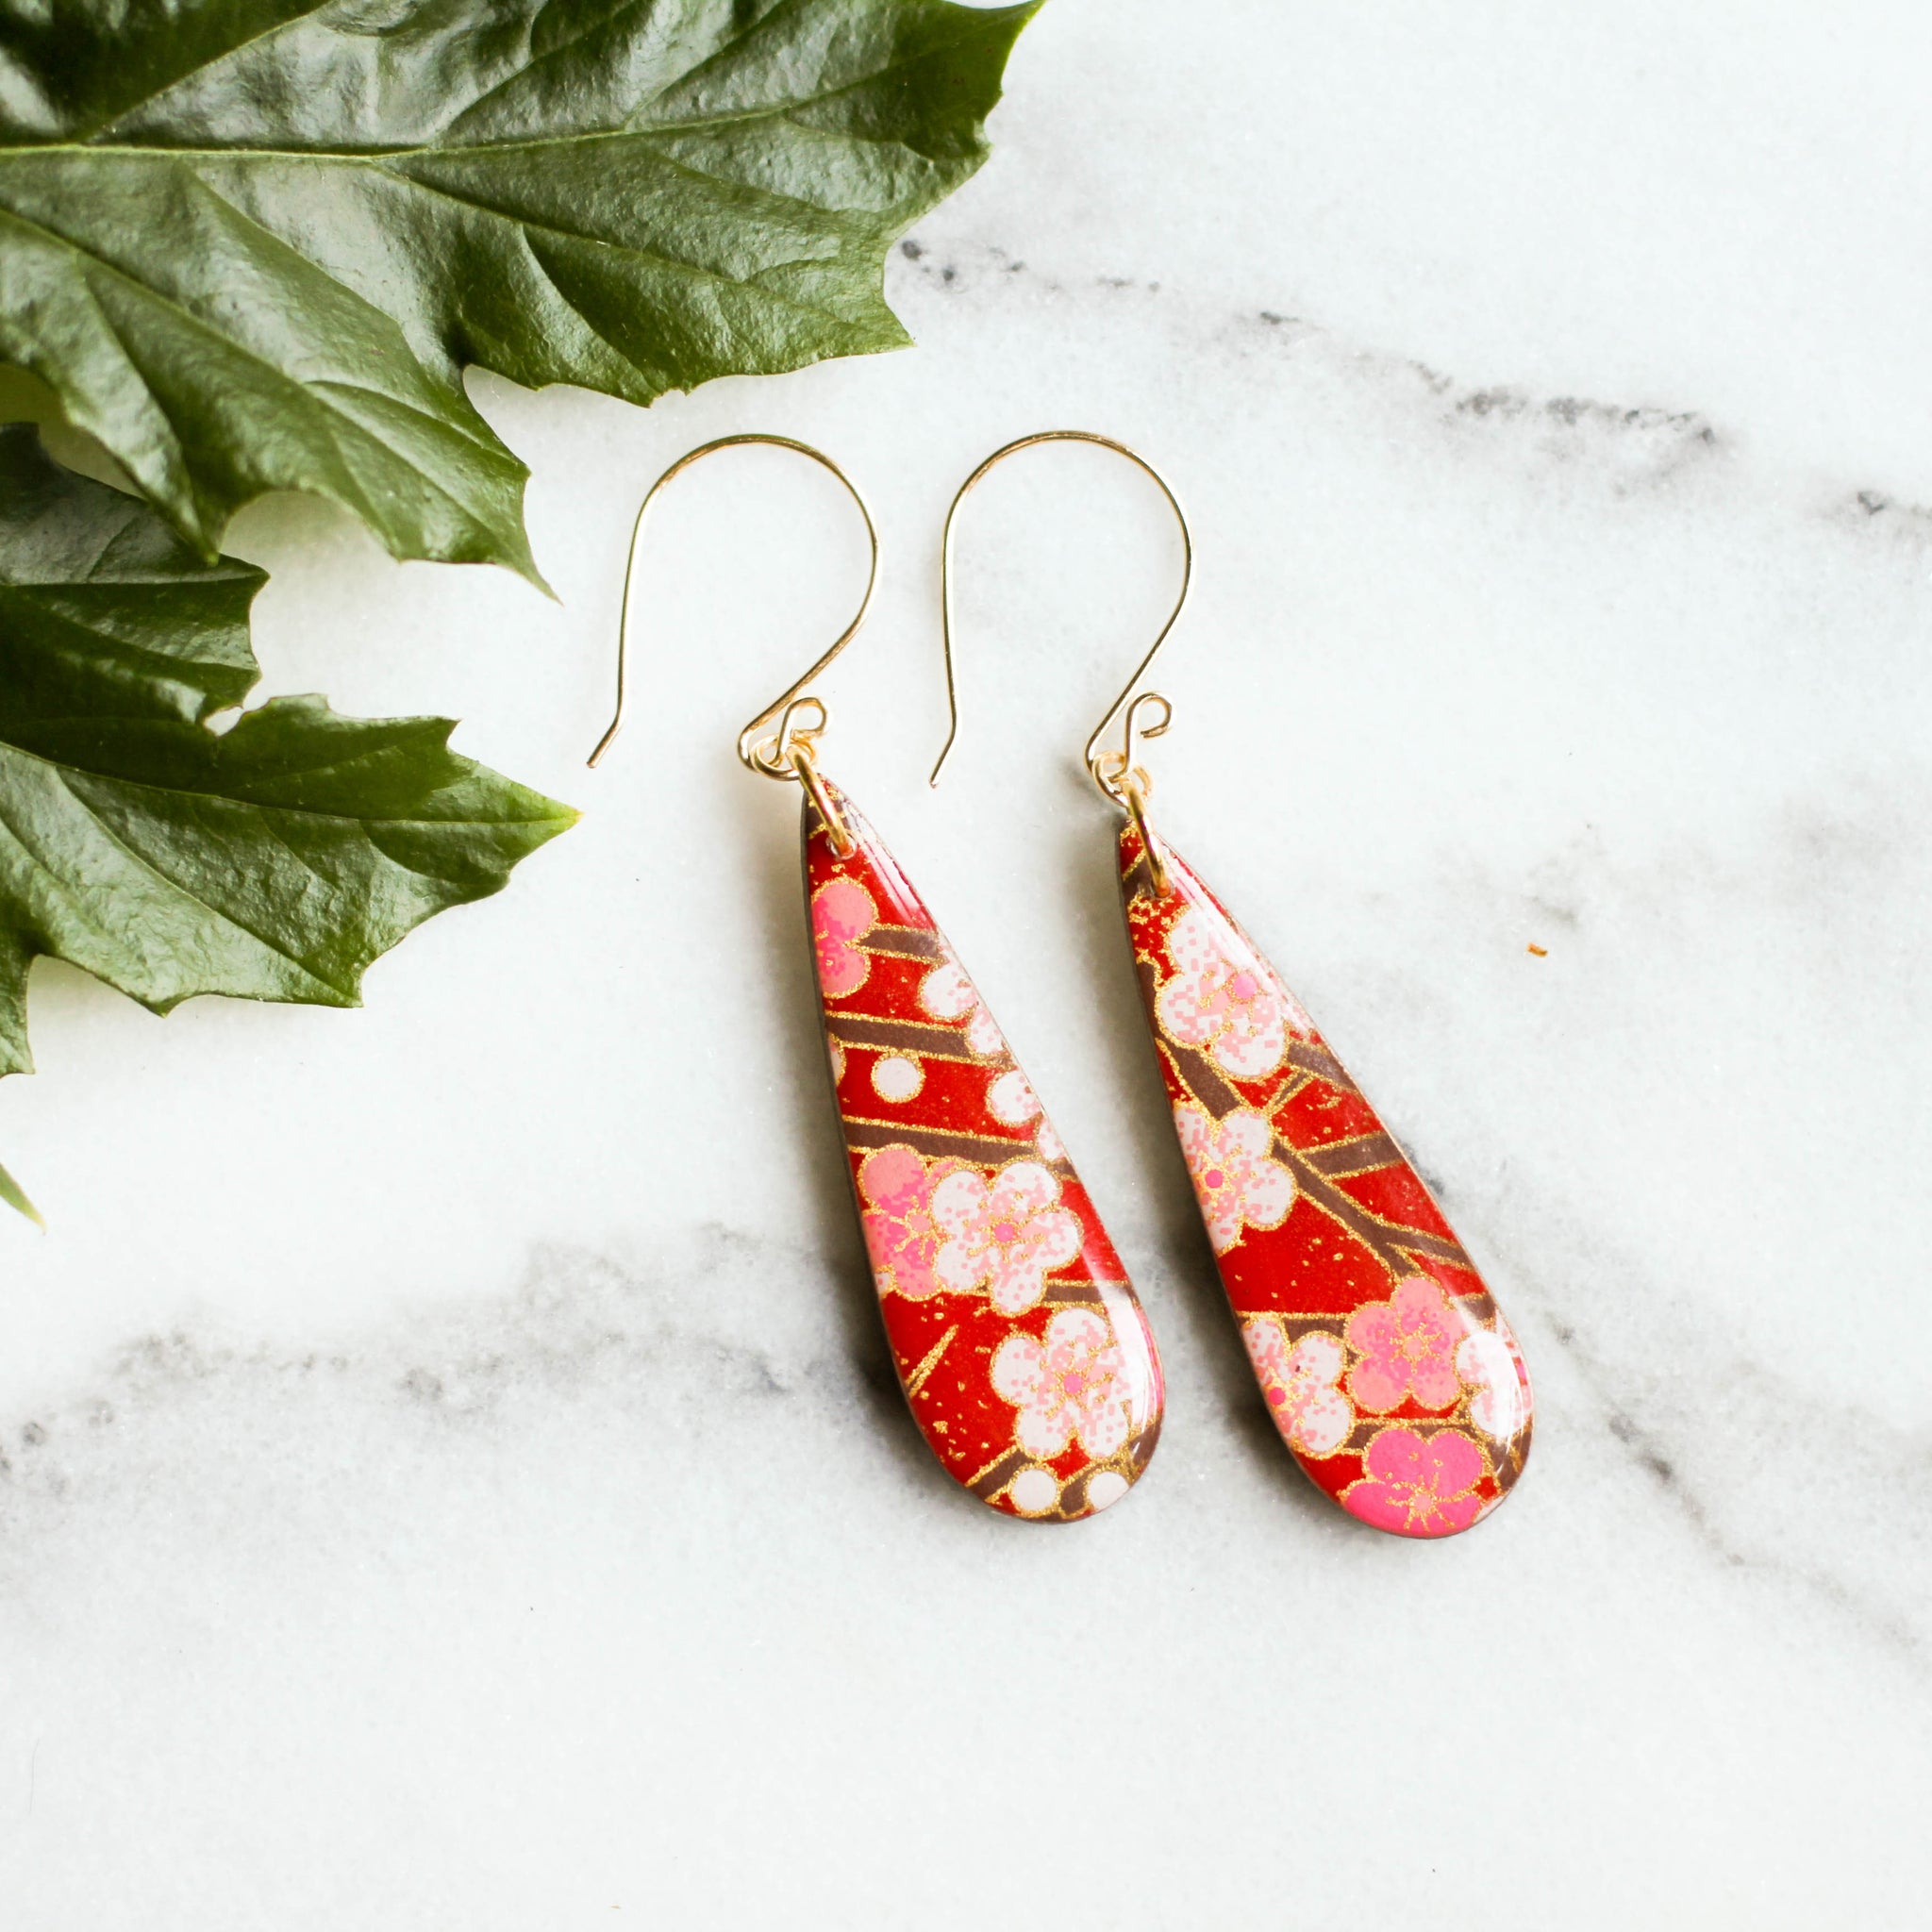 Teardrop Red Cherry Blossom Japanese Paper Earrings - No Man's Land Artifacts